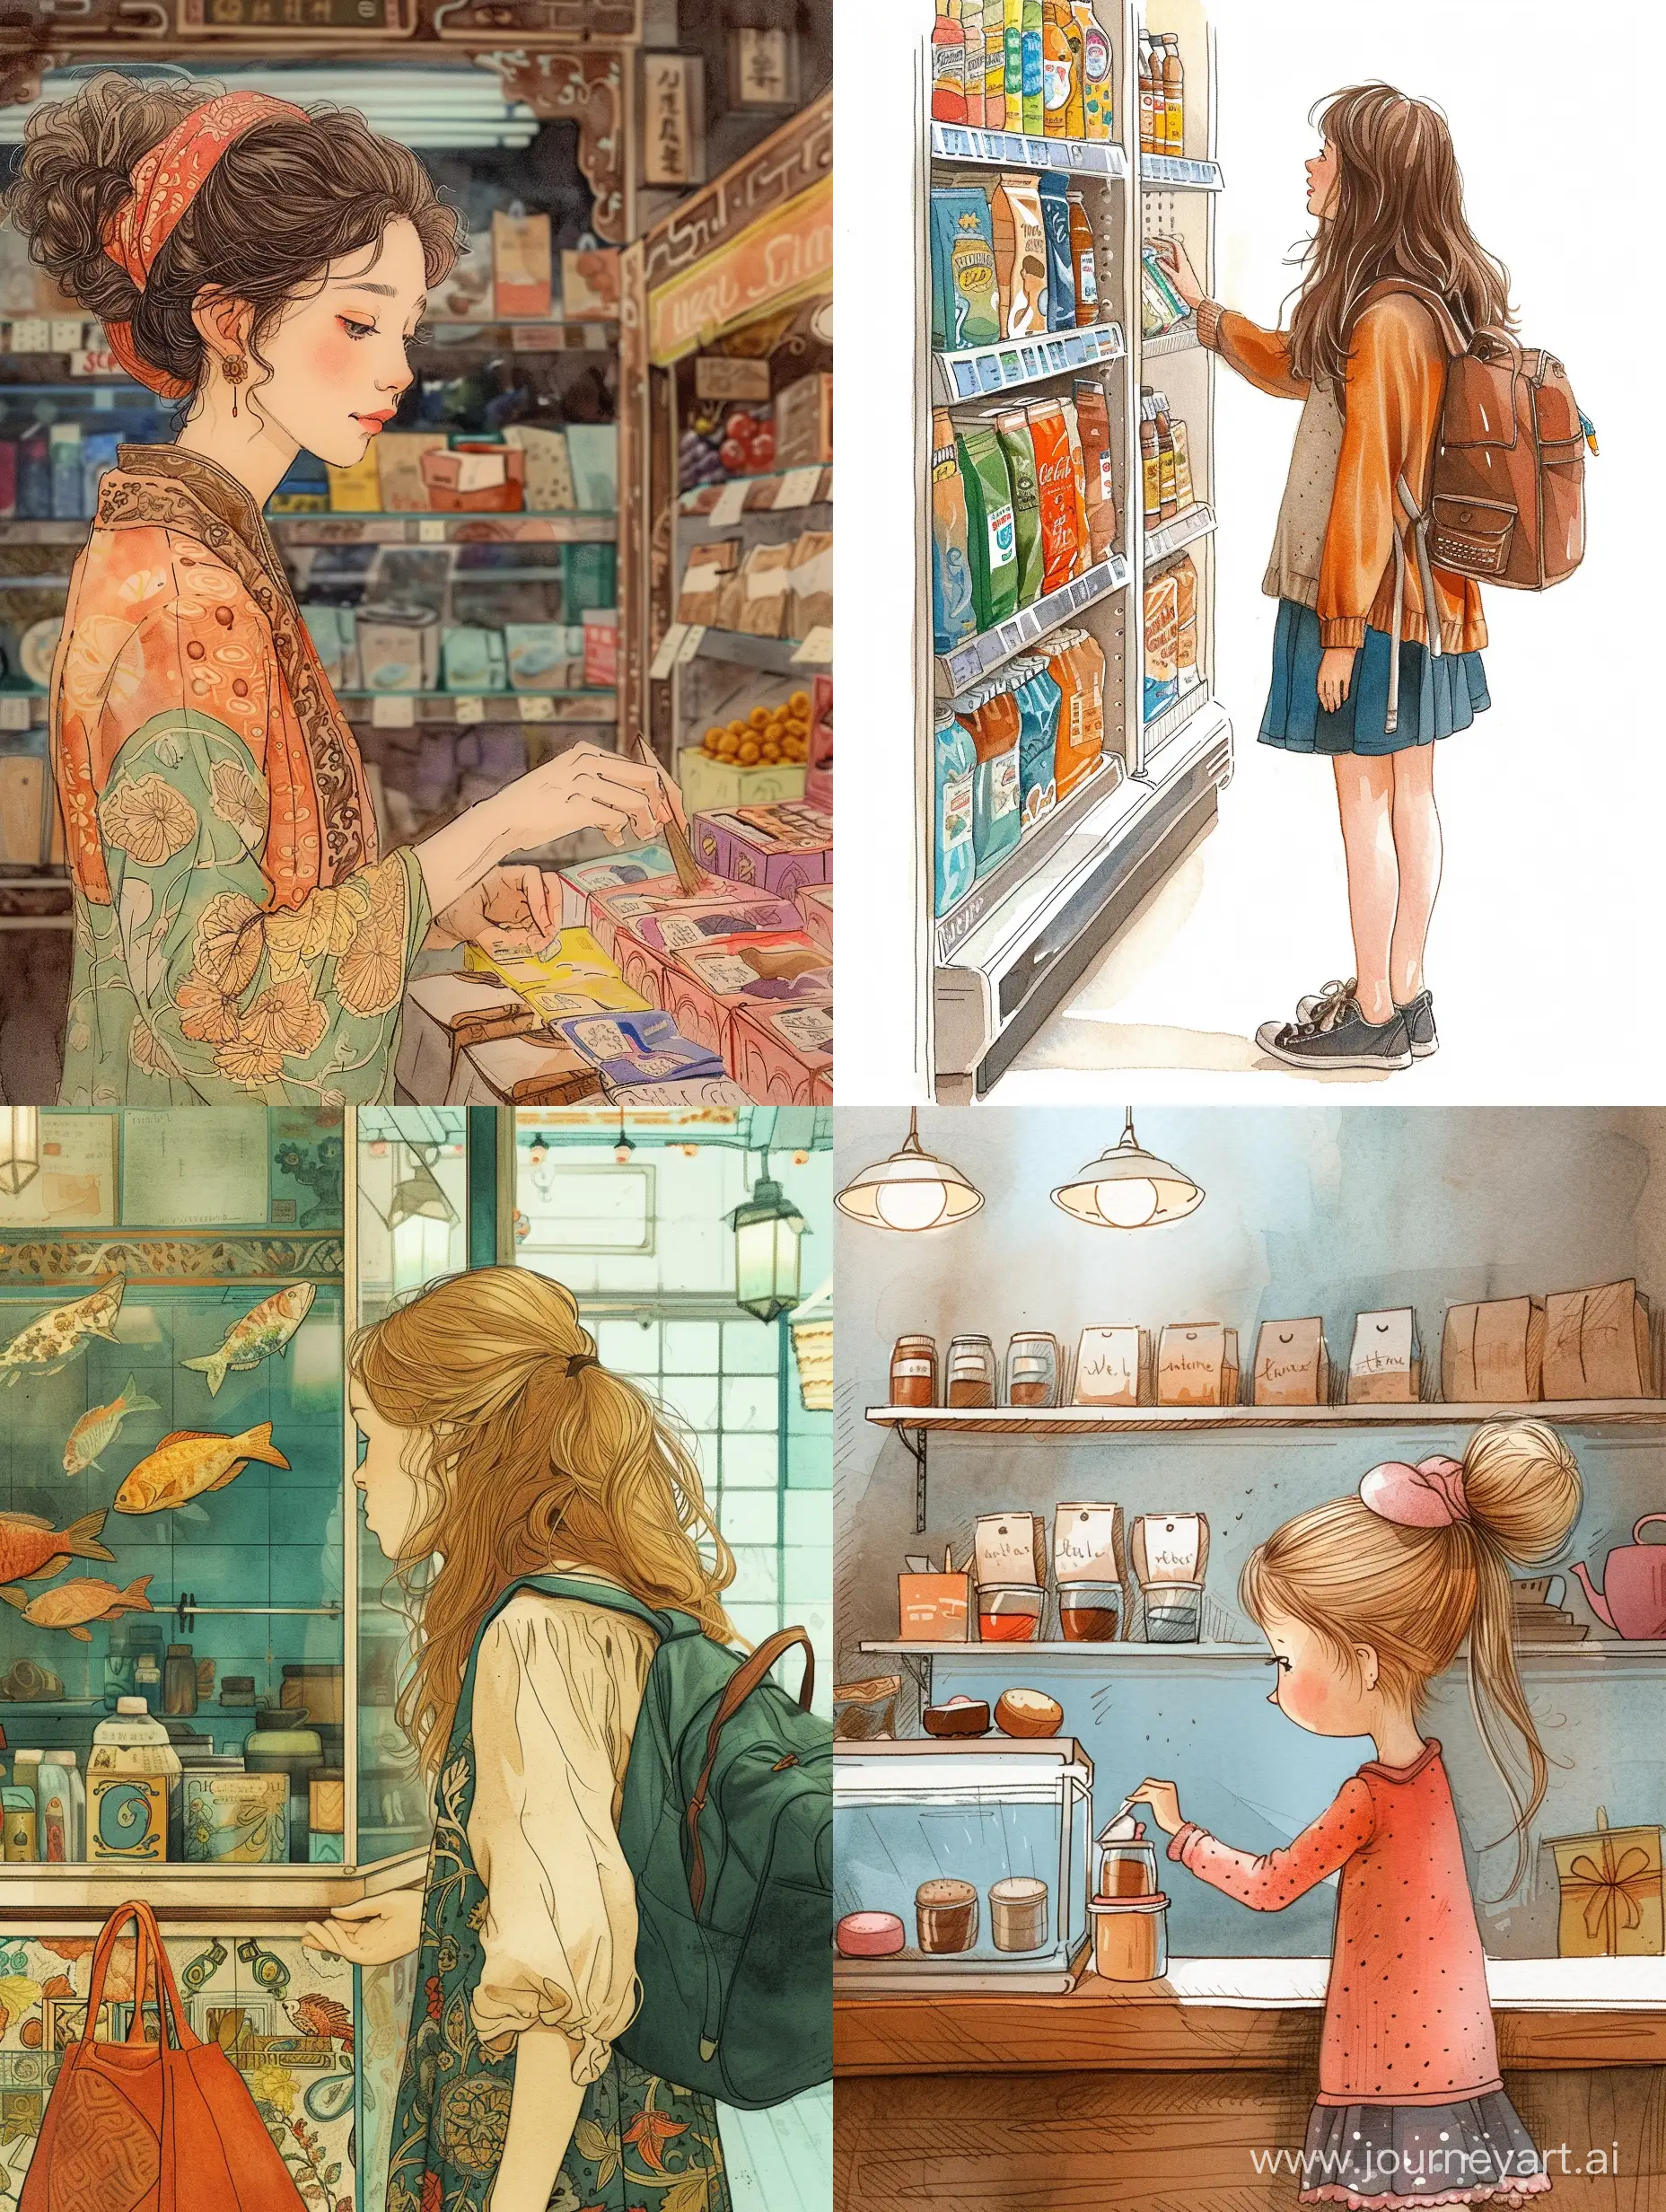 Young-Girl-Selects-Art-Supplies-Colorful-Drawing-and-Purchases